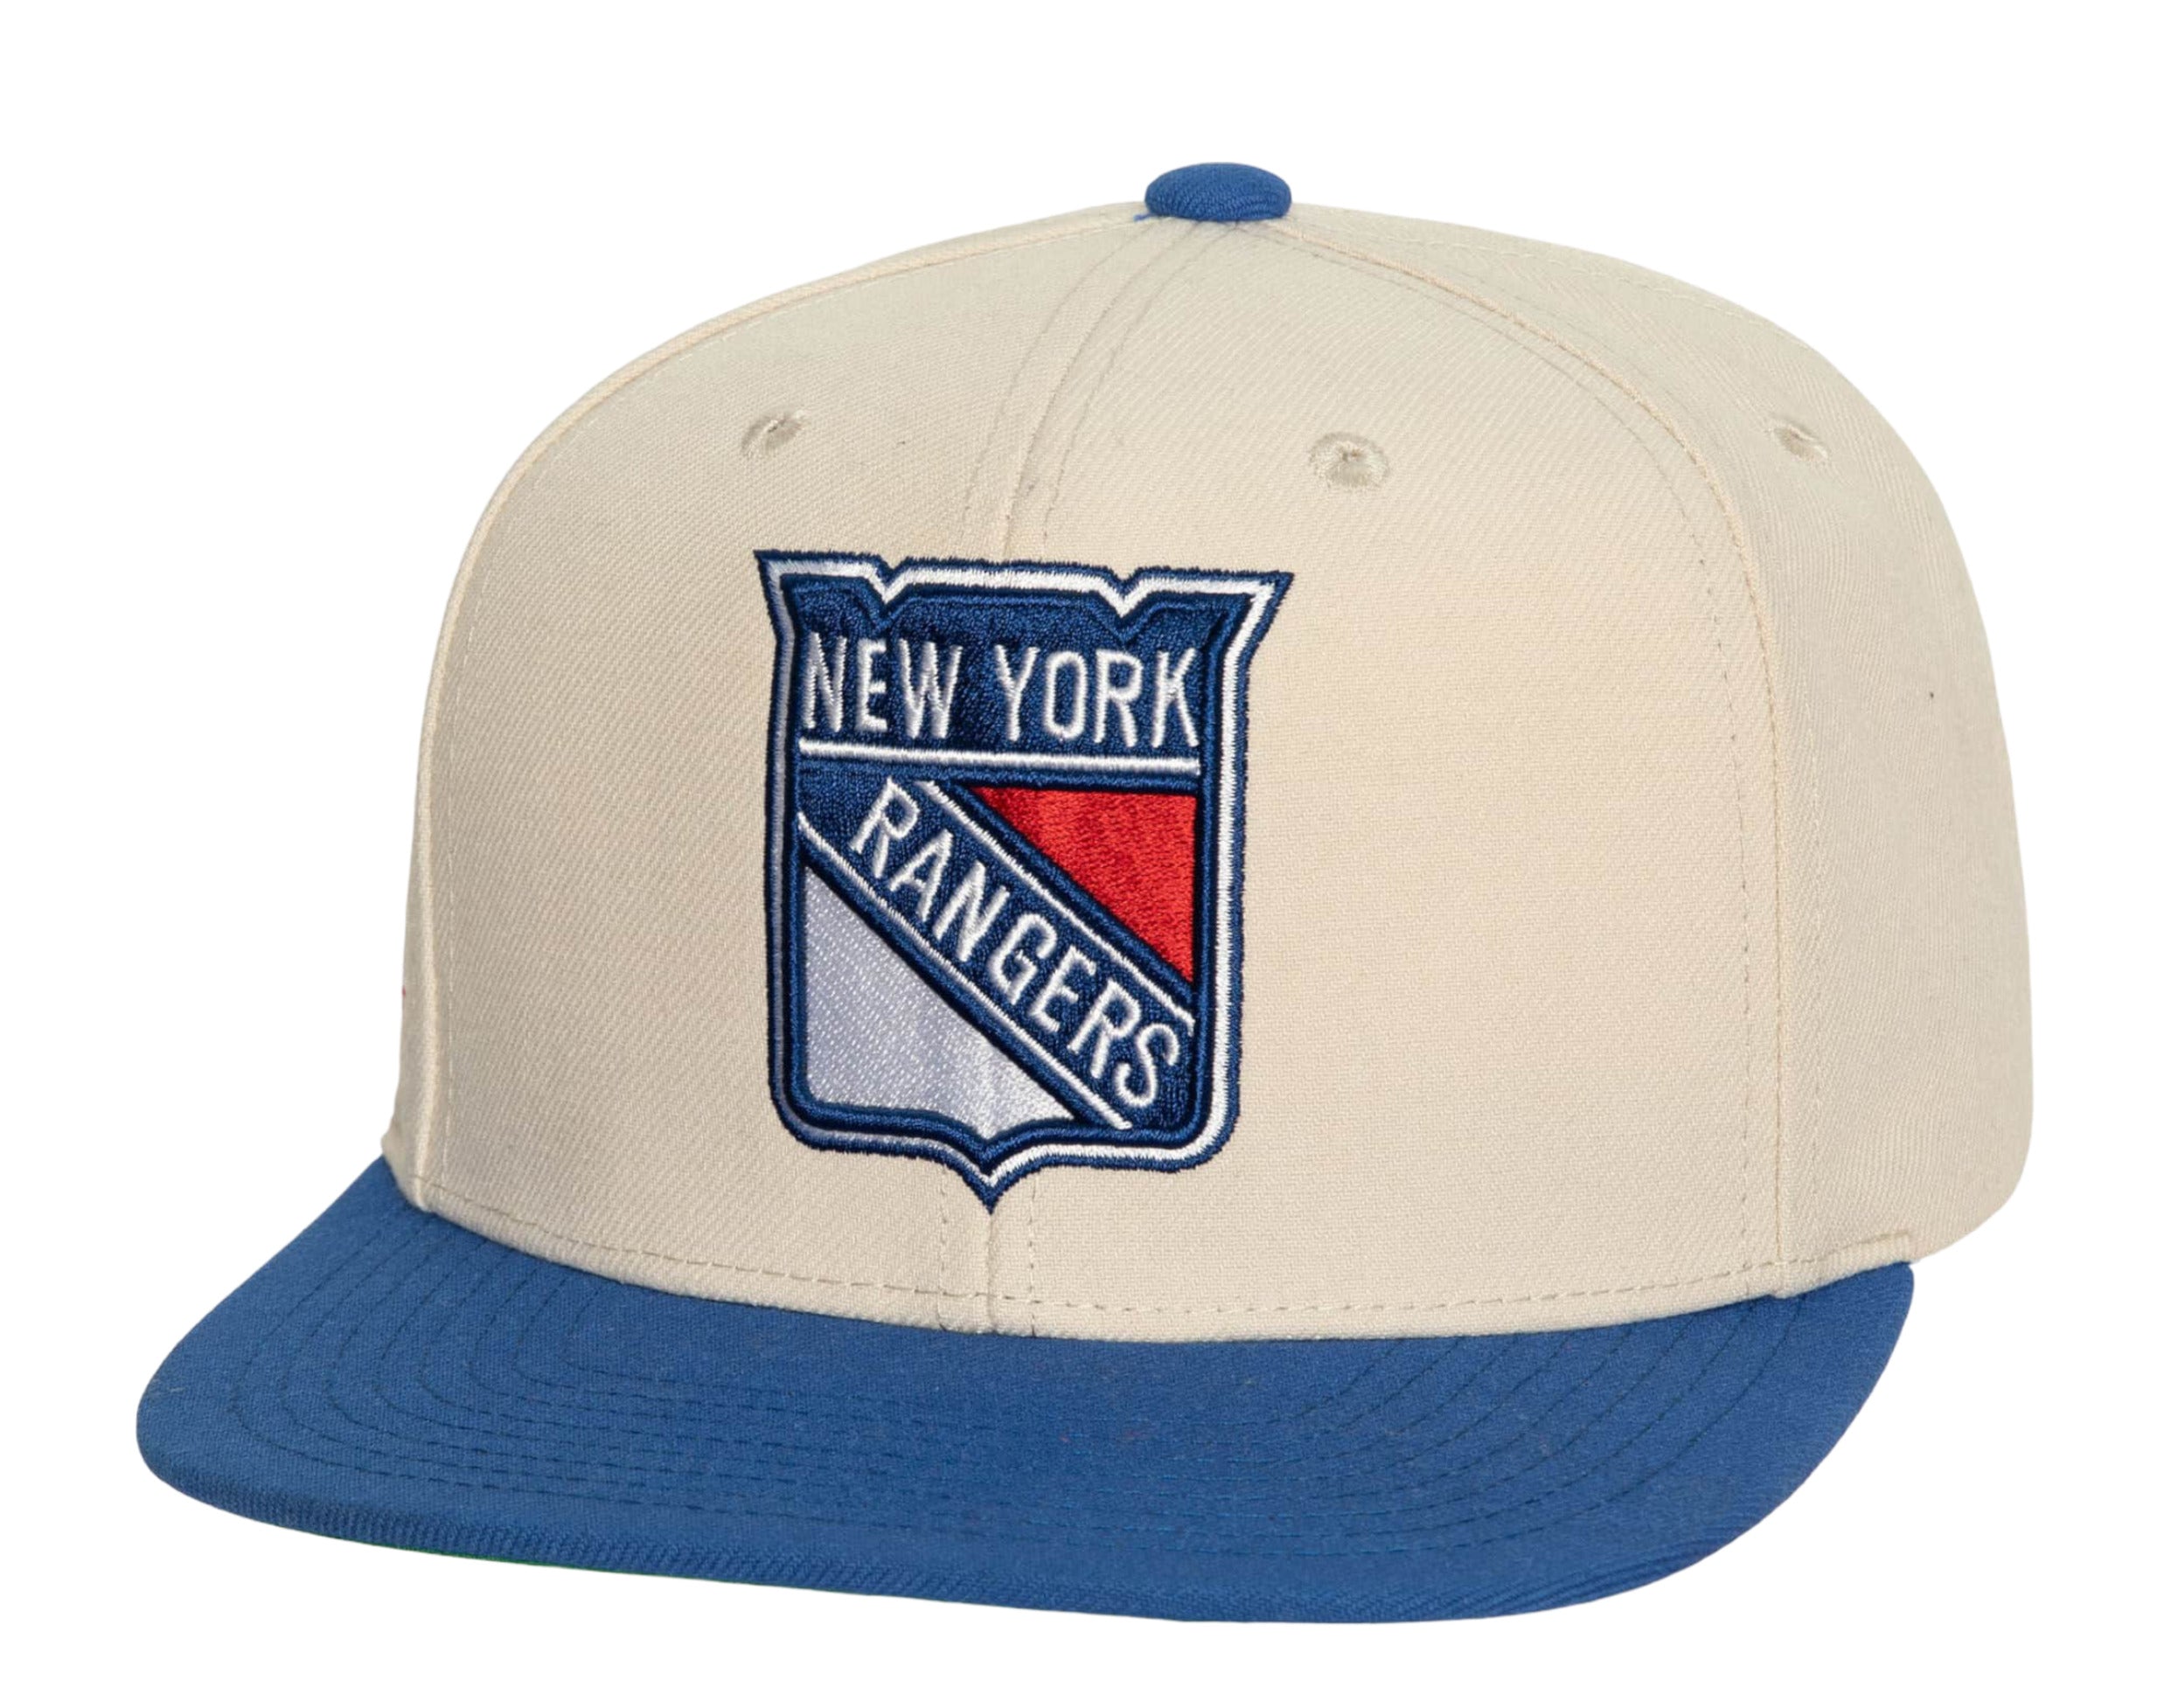 MITCHELL & NESS OFF WHITE MIGHTY DUCKS SNAPBACK (OFF WHITE